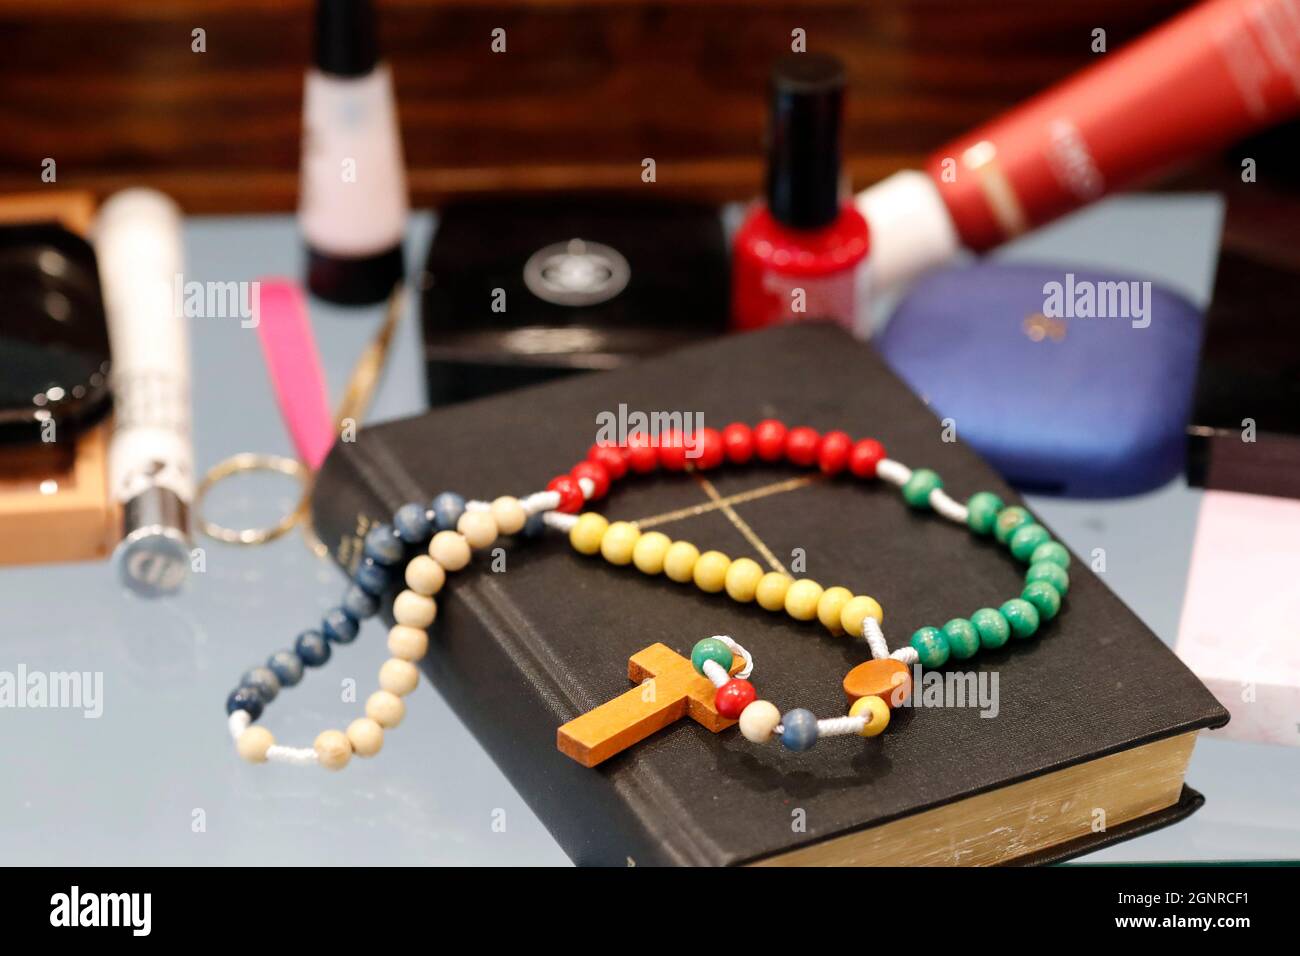 Makeup products, bible  and prayer beads on table. Stock Photo